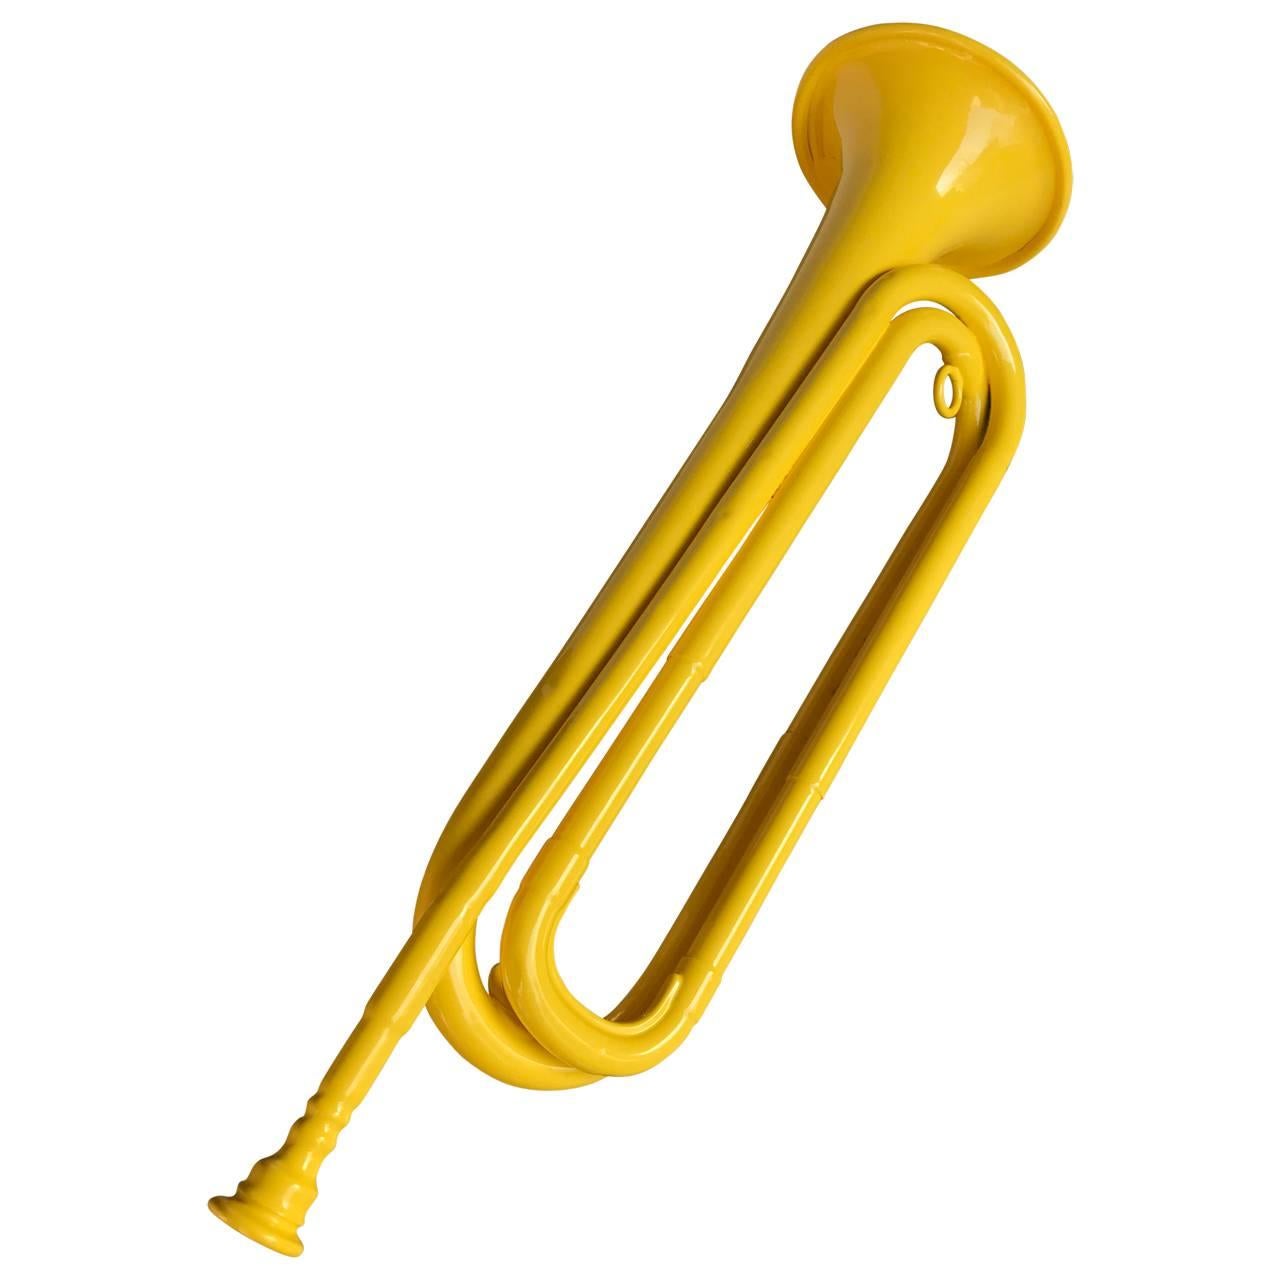 Czech Vintage Bugle Or Trumpet In Bright Yellow Powdercoating